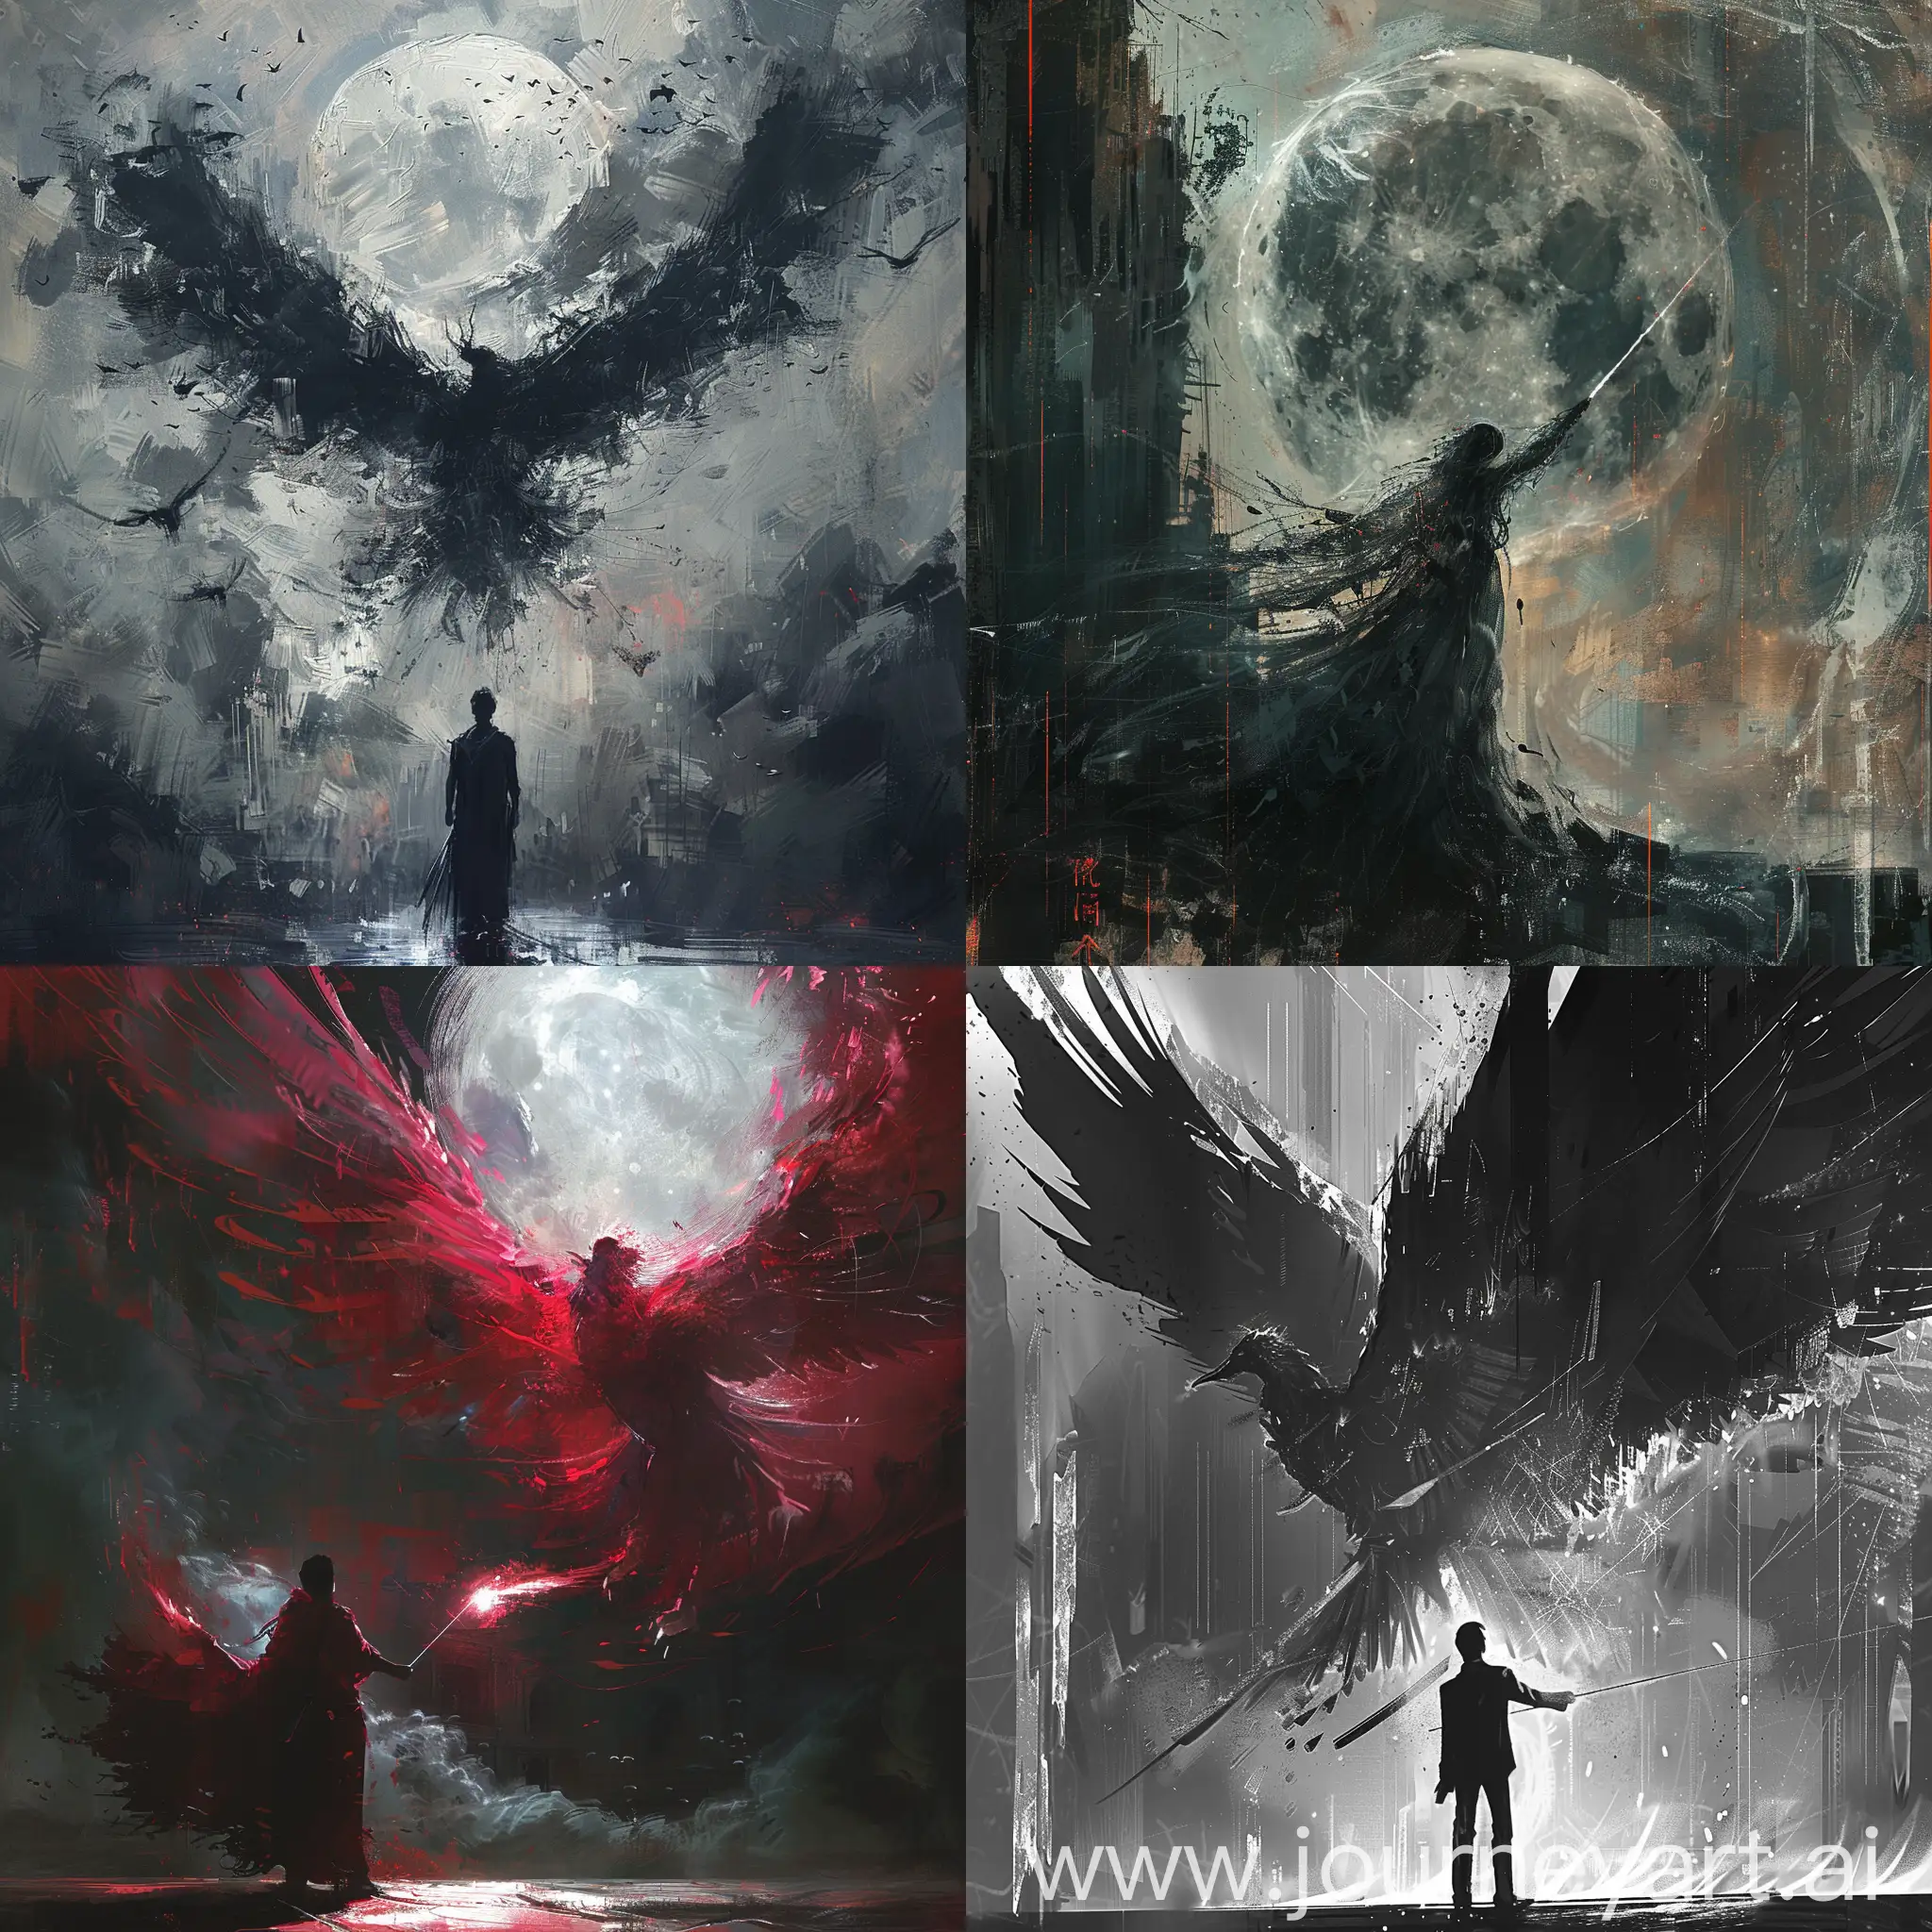 Mysterious-Conductor-Directing-Transparent-Phoenix-in-Moonlight